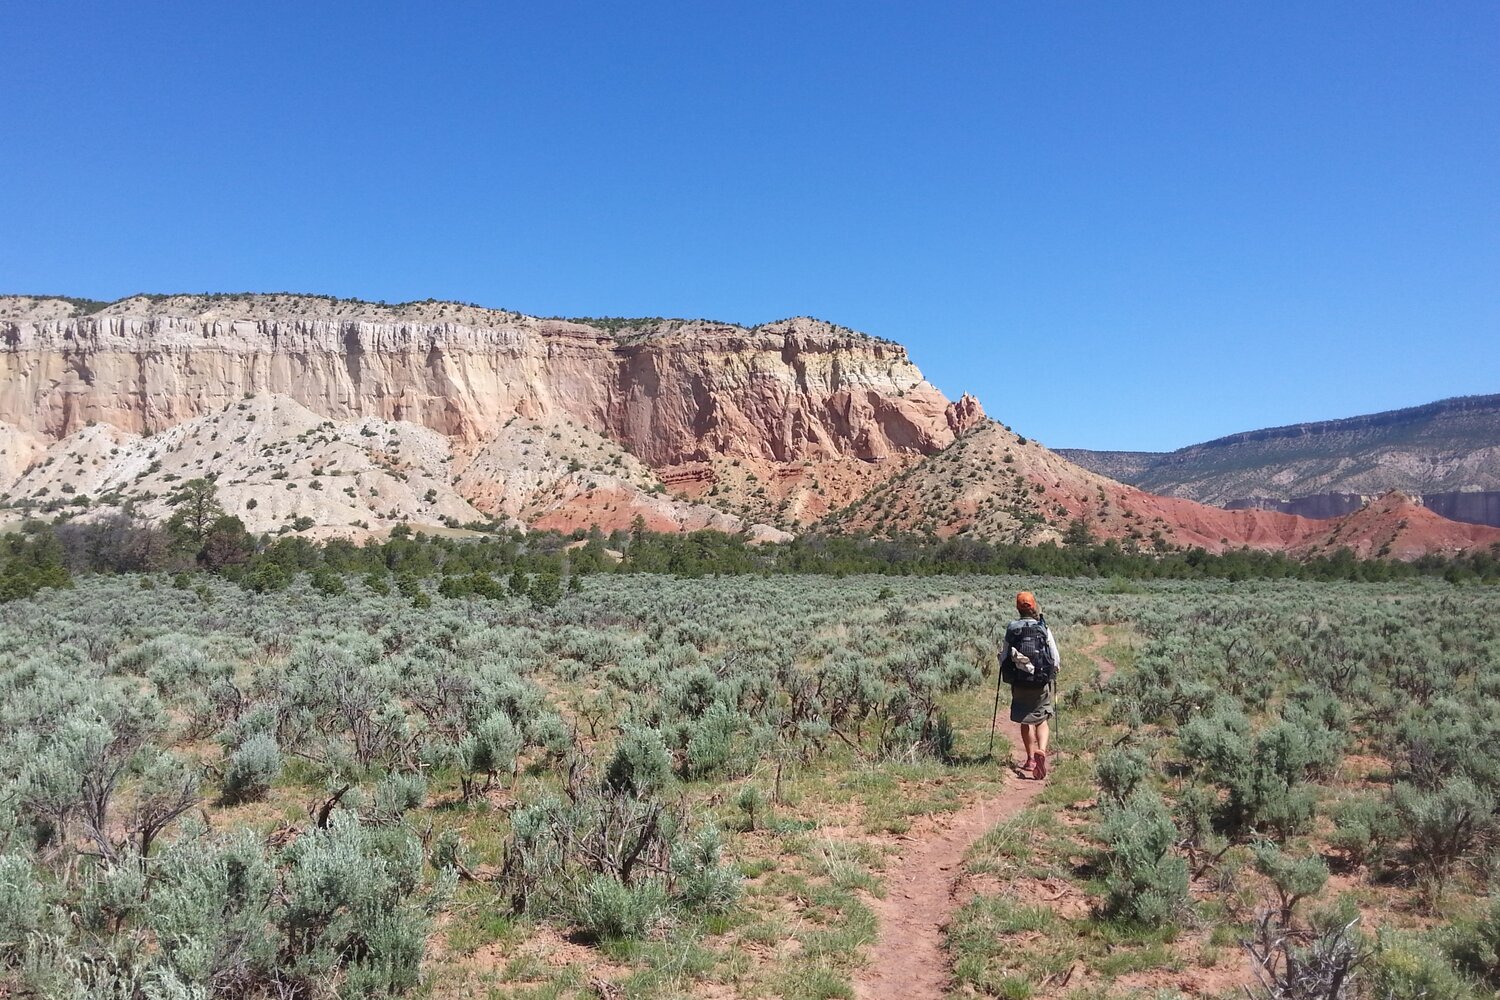 Hiking among the vivid colors and towering rock walls of Northern New Mexico